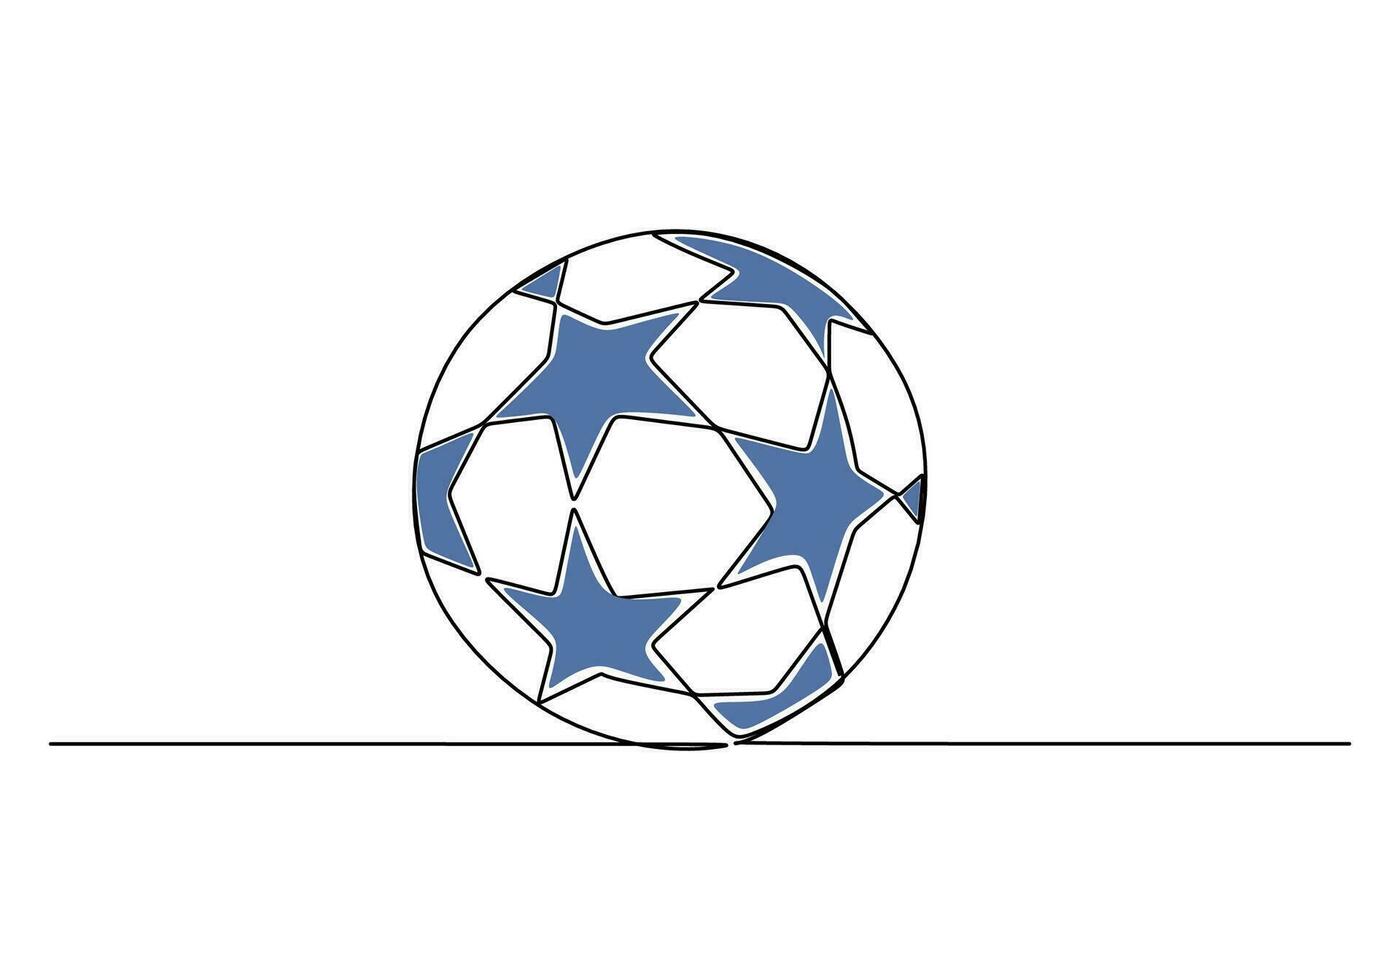 Soccer Ball One Line Drawing Continuous Hand Drawn Sport Theme Object vector